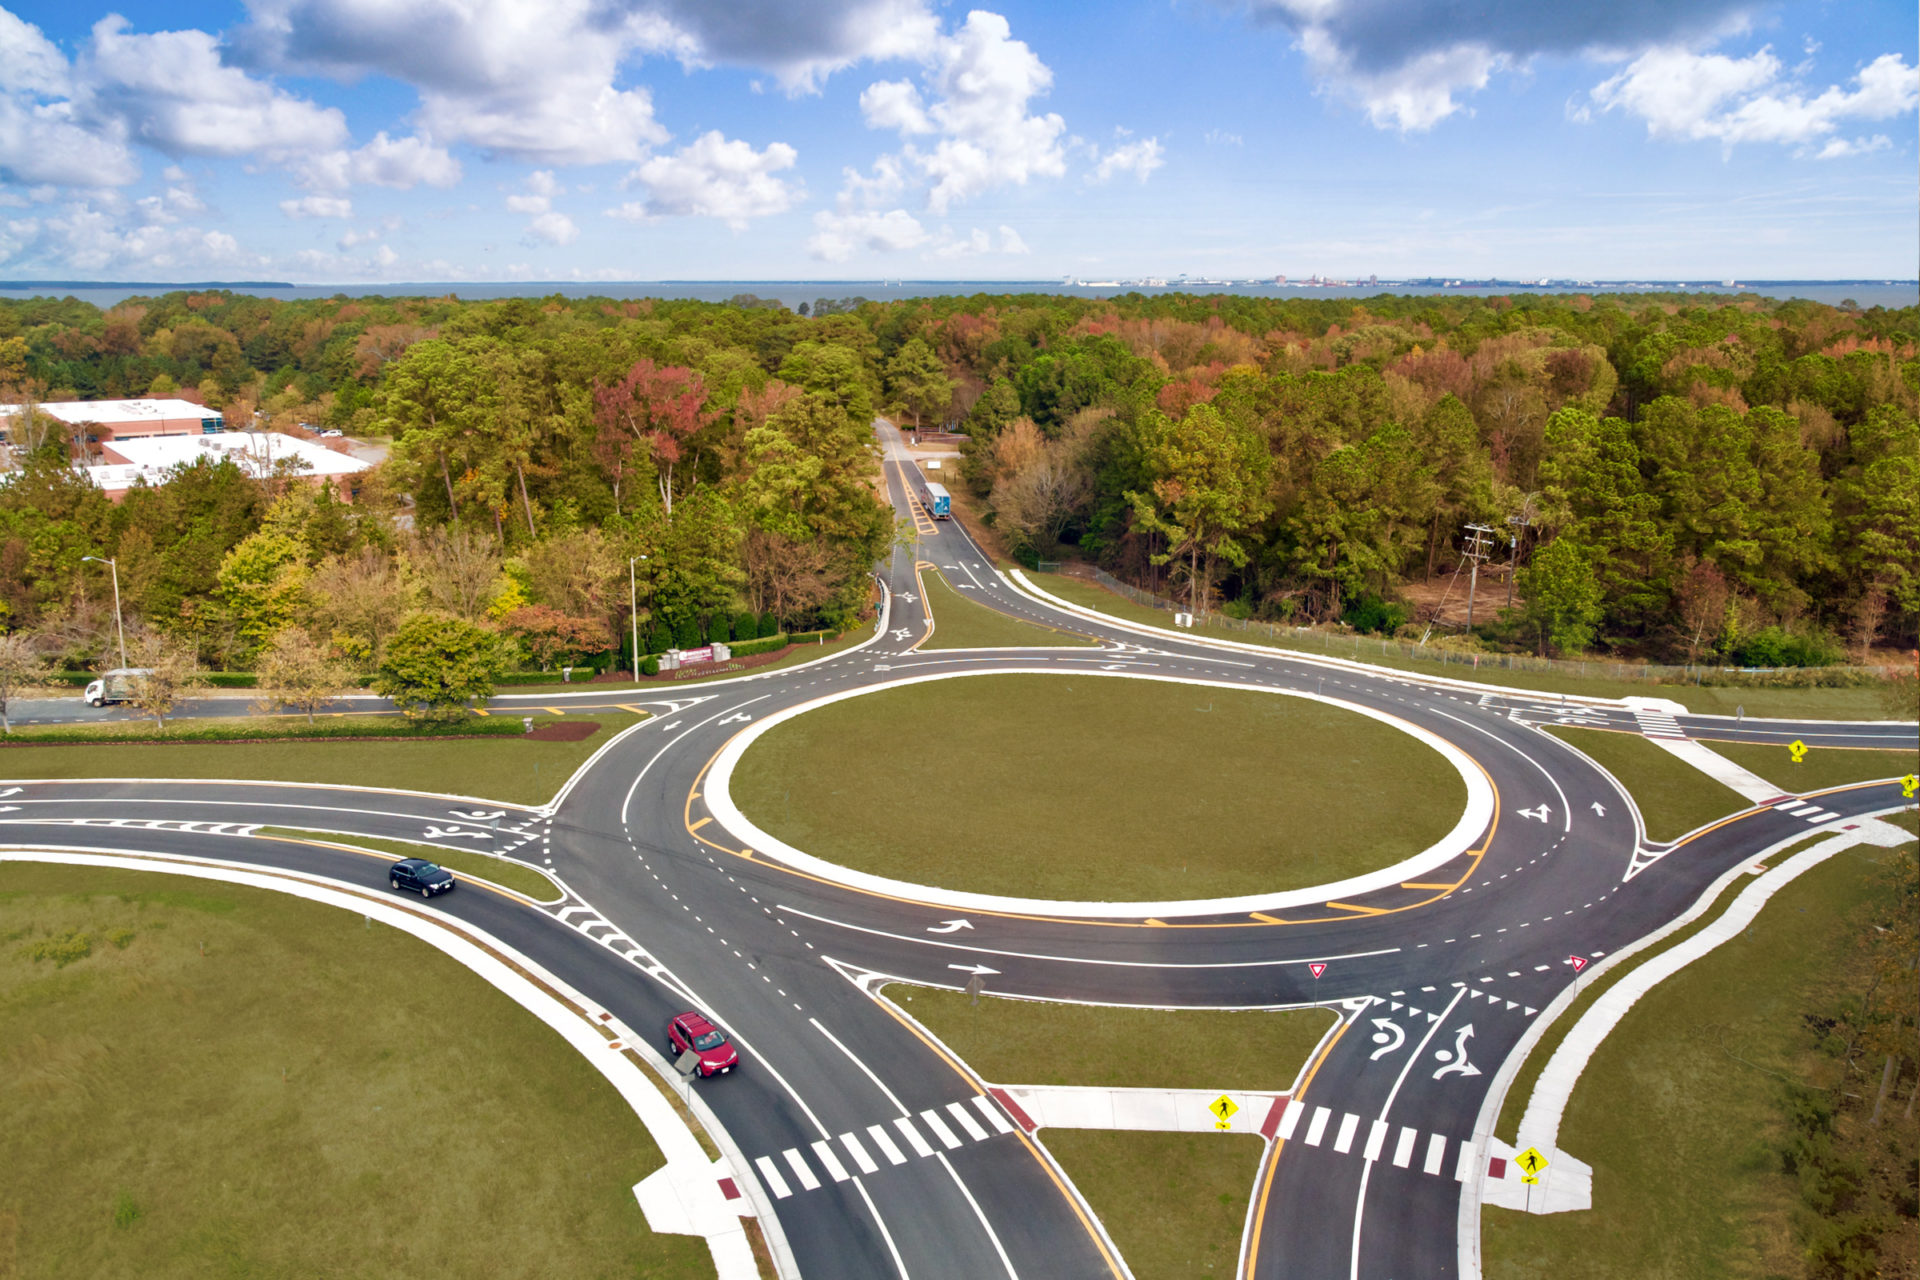 College Drive Roundabout in Suffolk, Virginia